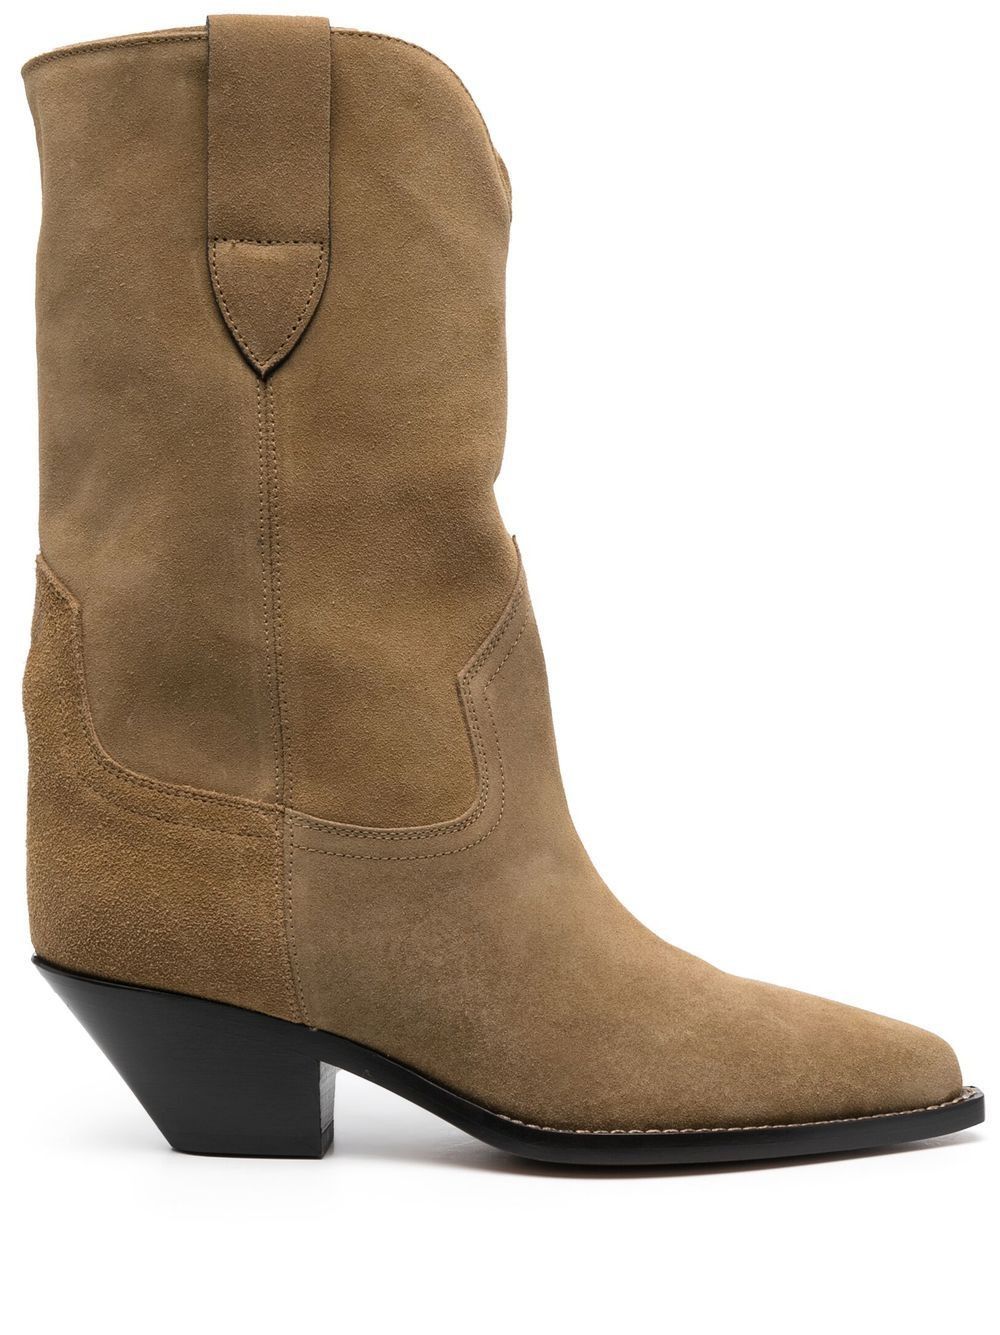 Duerto suede boots | Farfetch Global